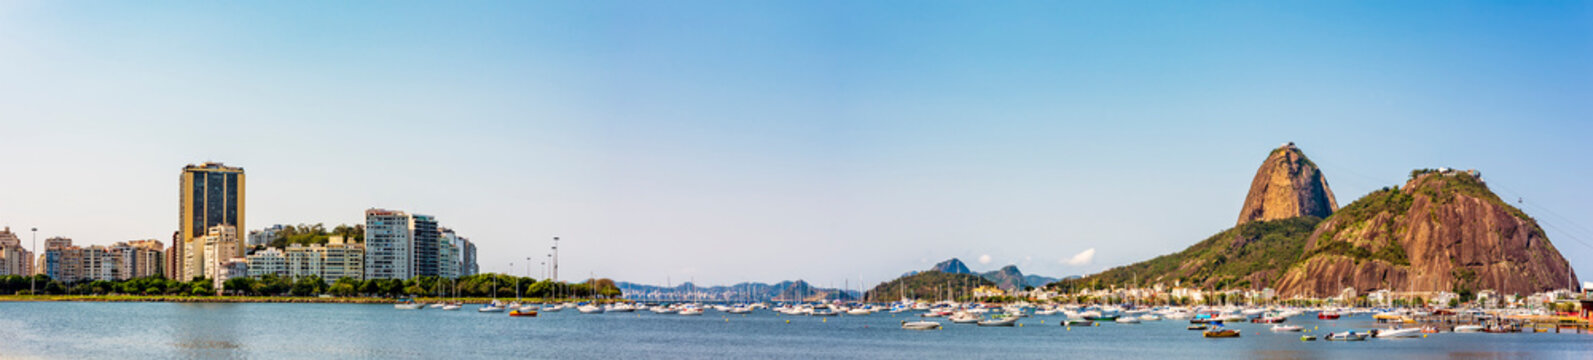 Panoramic image of Rio de Janeiro with the boats moored, the Sugarloaf hill, Guanabara bay and Botofogo beach surrounded by the buildings and mountains of the city